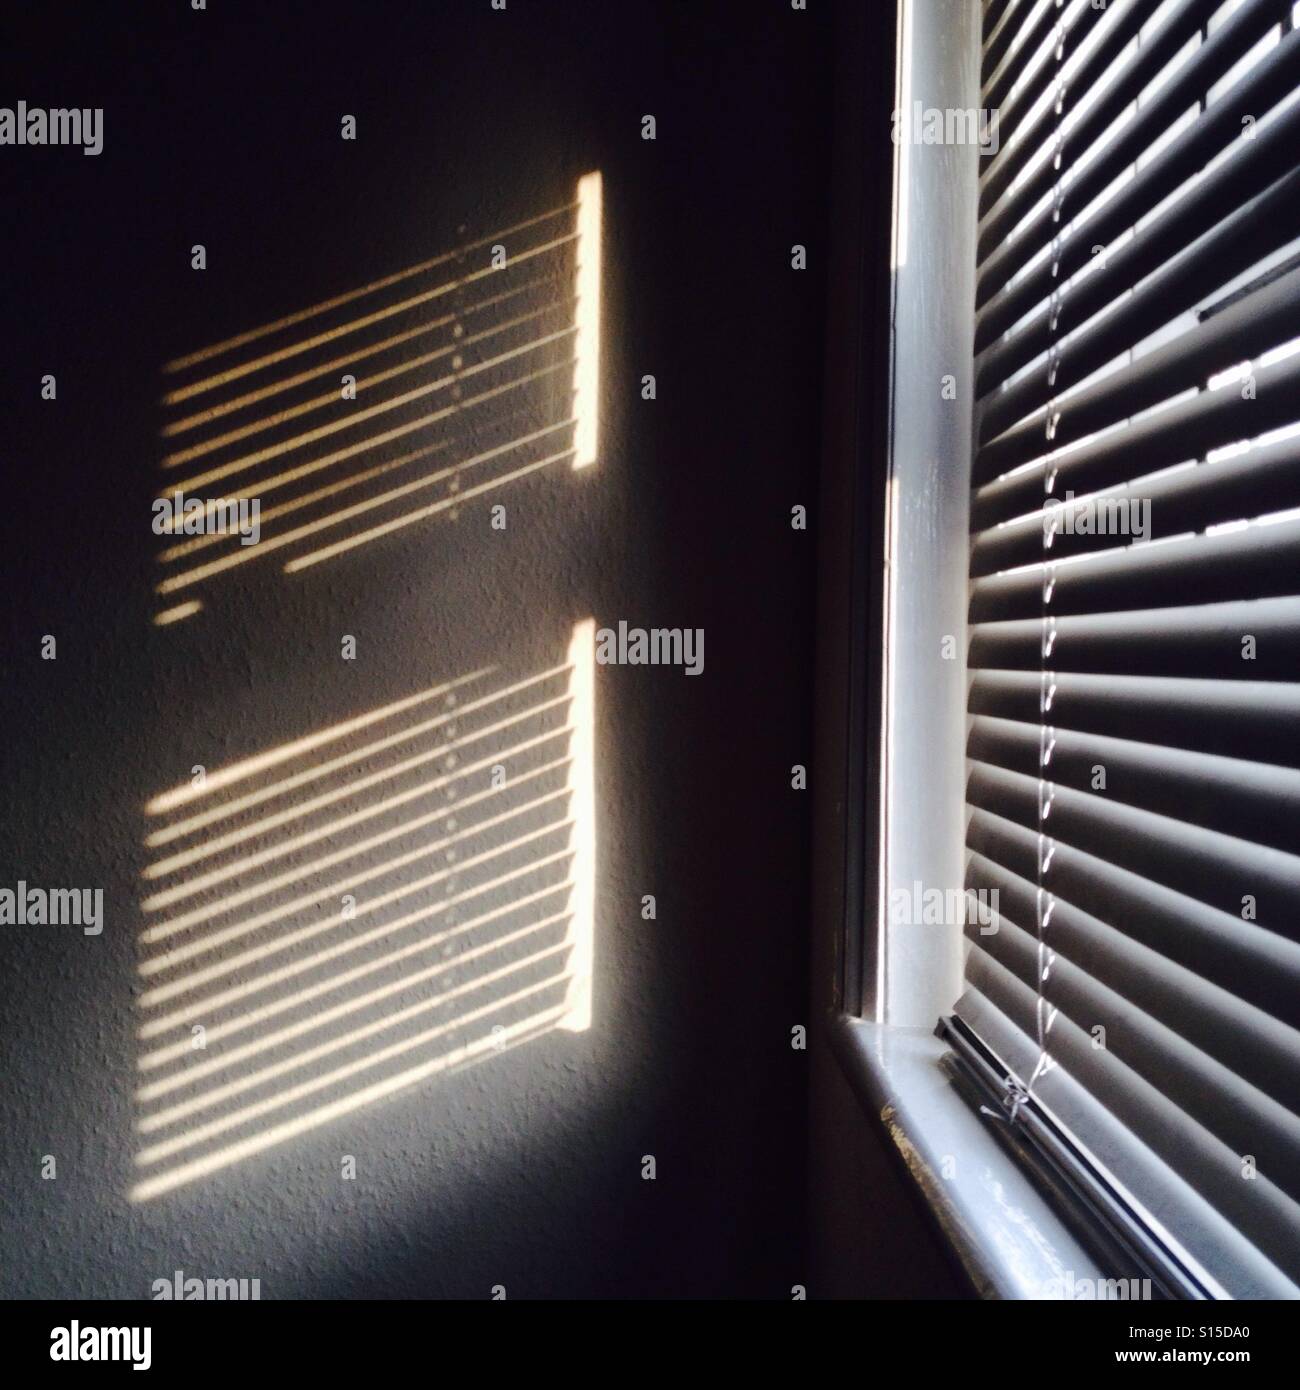 Sunlight seeping through a closed window blind casting a reflection on woodchip wallpaper. Stock Photo